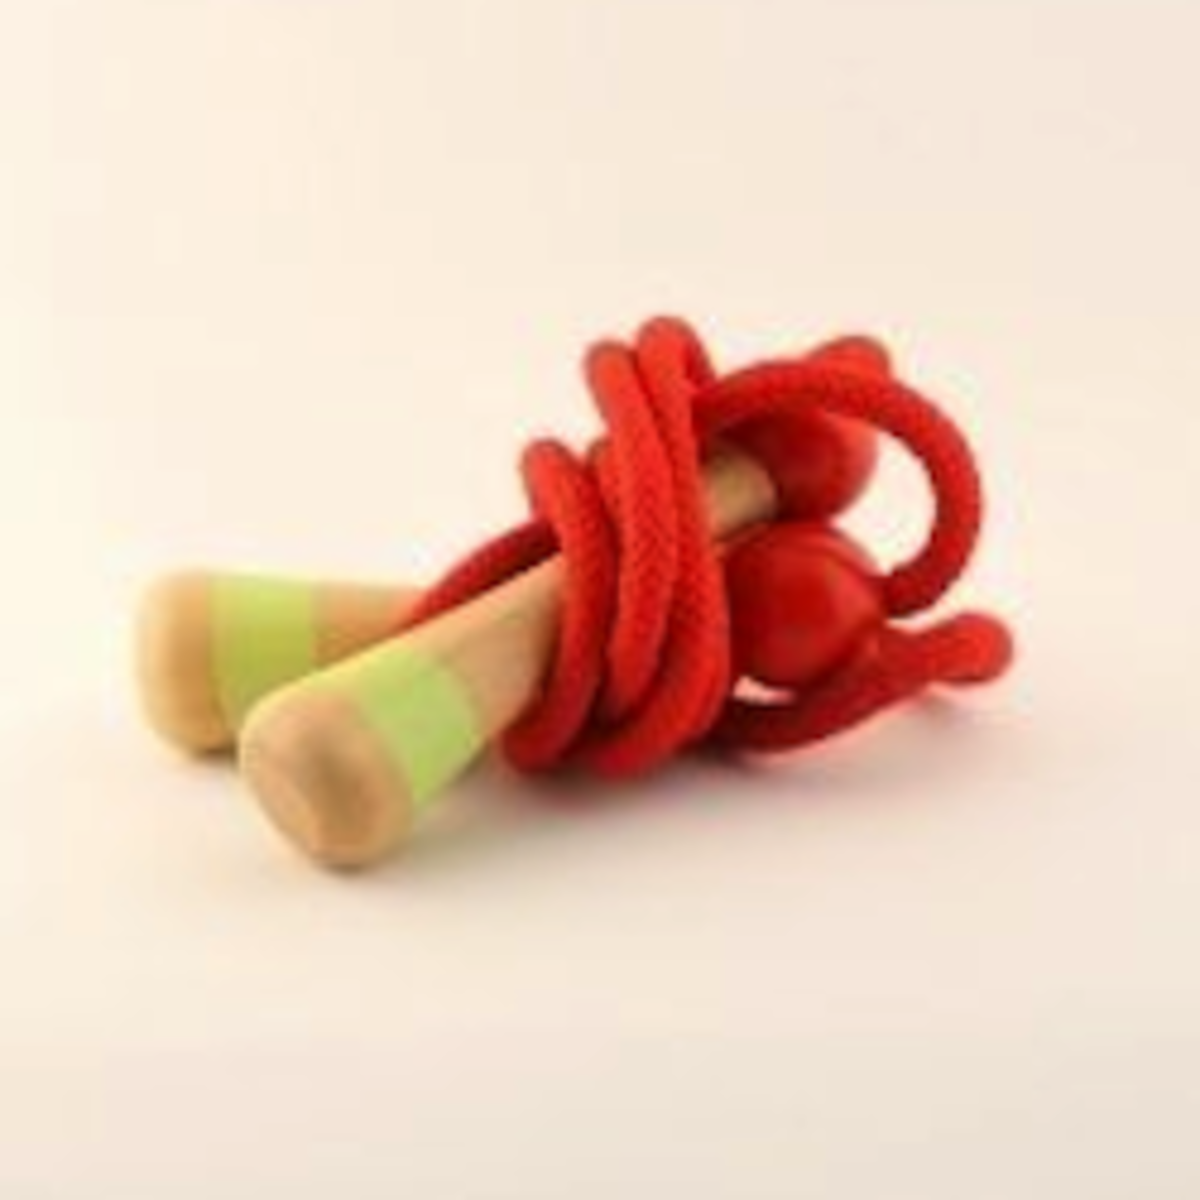 A children's game using few supplies: All you need Is a piece of rope, with or without the handles.